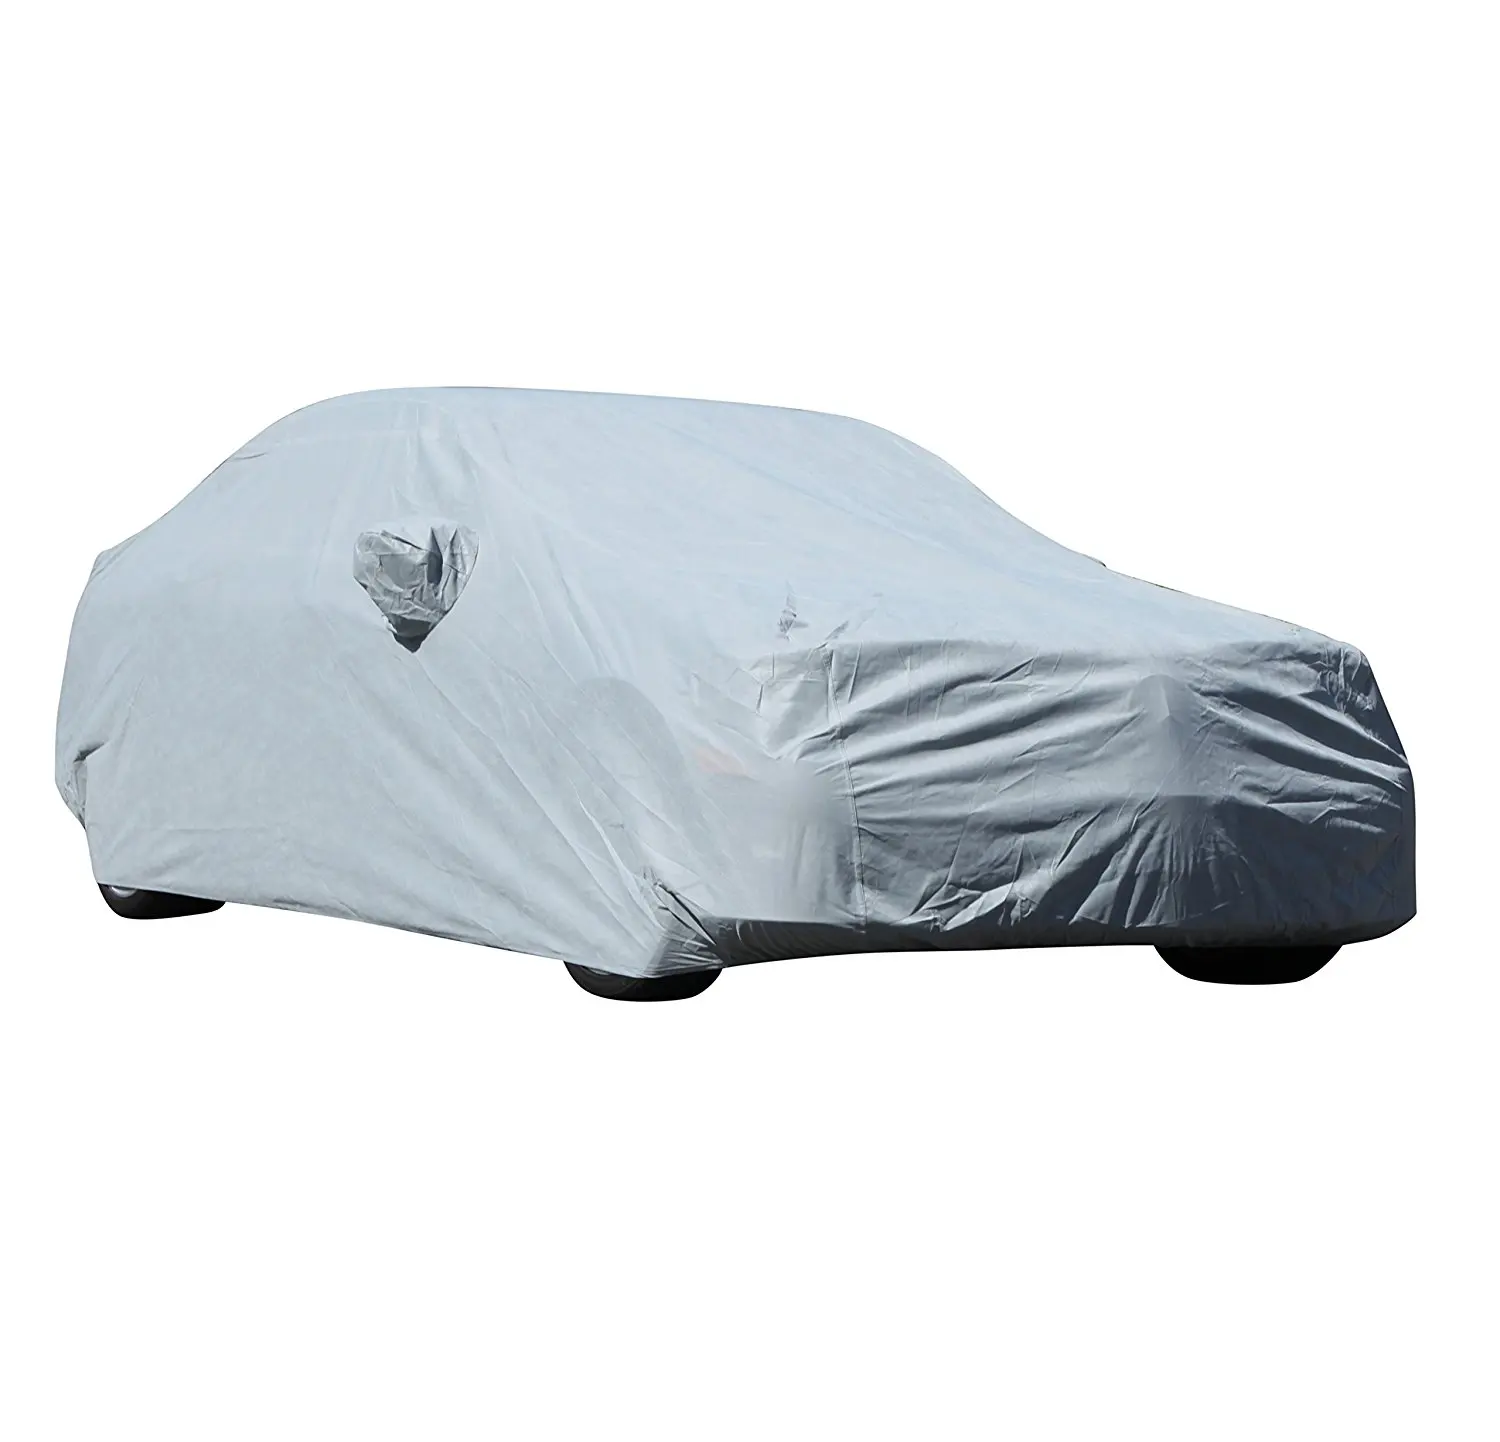 Waterproof and dustproof grey PEVA car cover Manufacturer direct supply high quality low price Vehicle protection cover